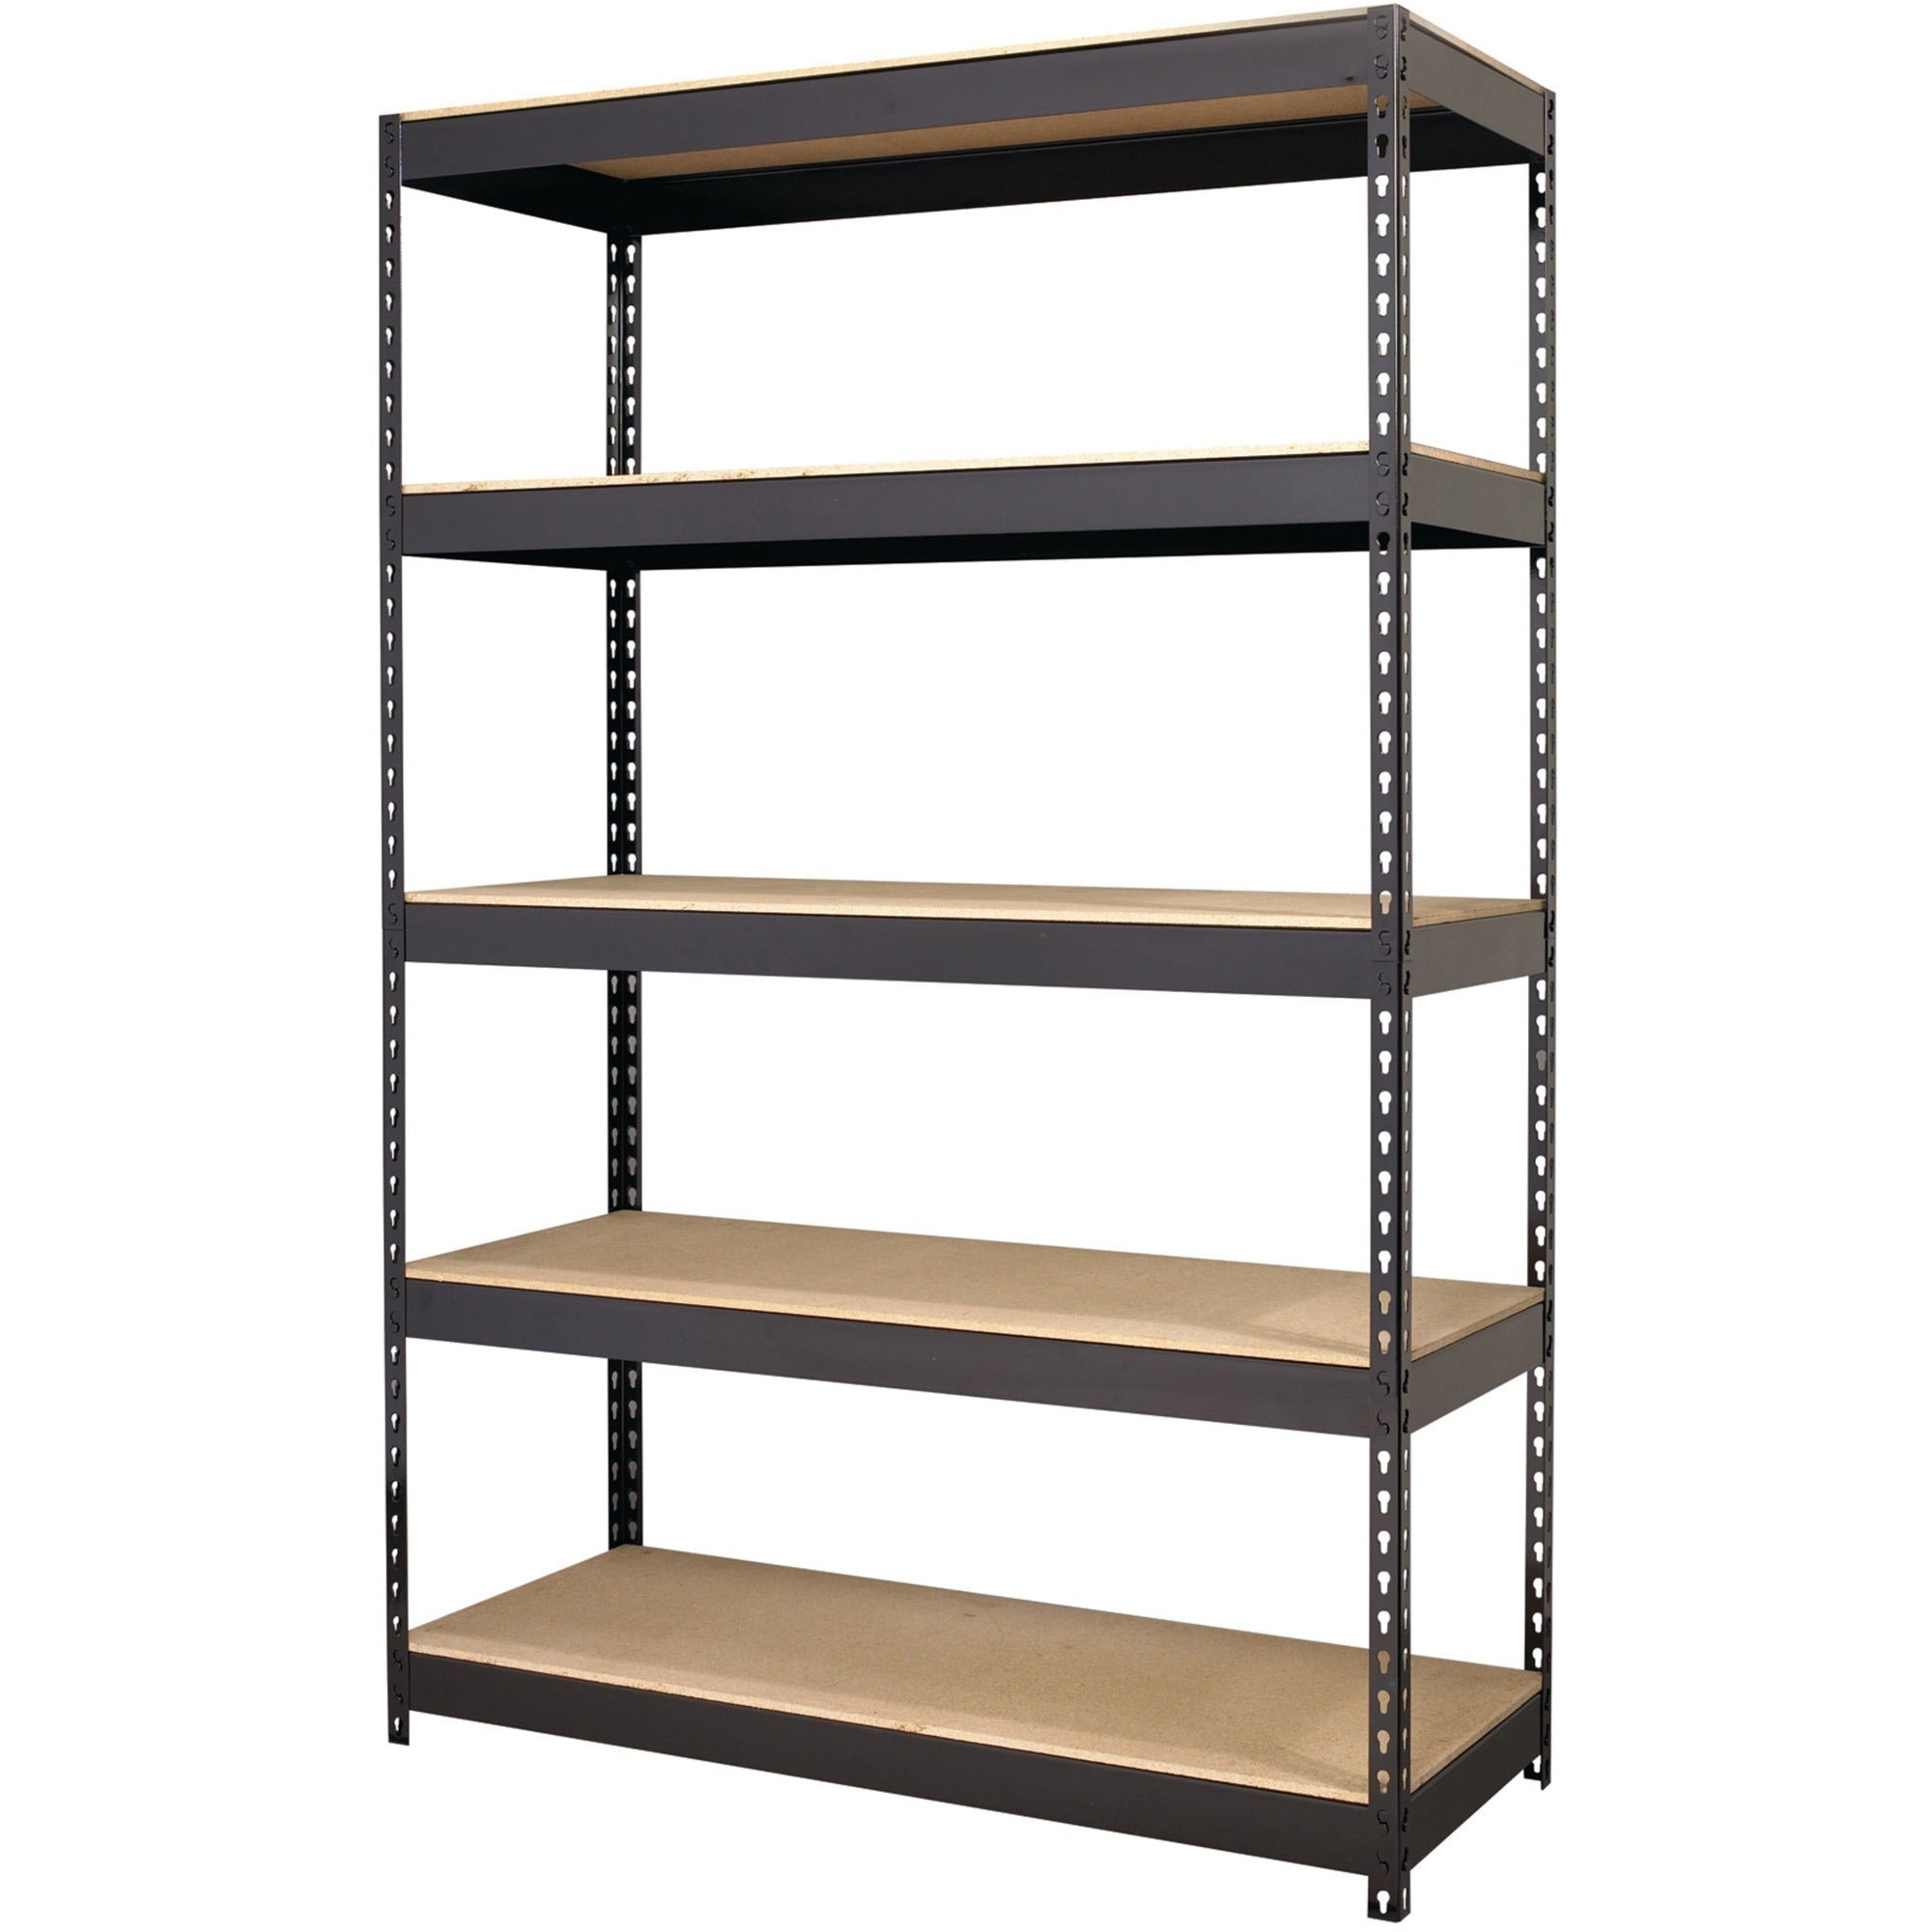 Lorell Fortress Riveted Shelving - 5 Compartment(s) - 5 Shelf(ves) - 72" Height x 48" Width x 18" Depth - Heavy Duty, Rust Resistant - 28% Recycled - Powder Coated - Black - Steel - 1 Each - 